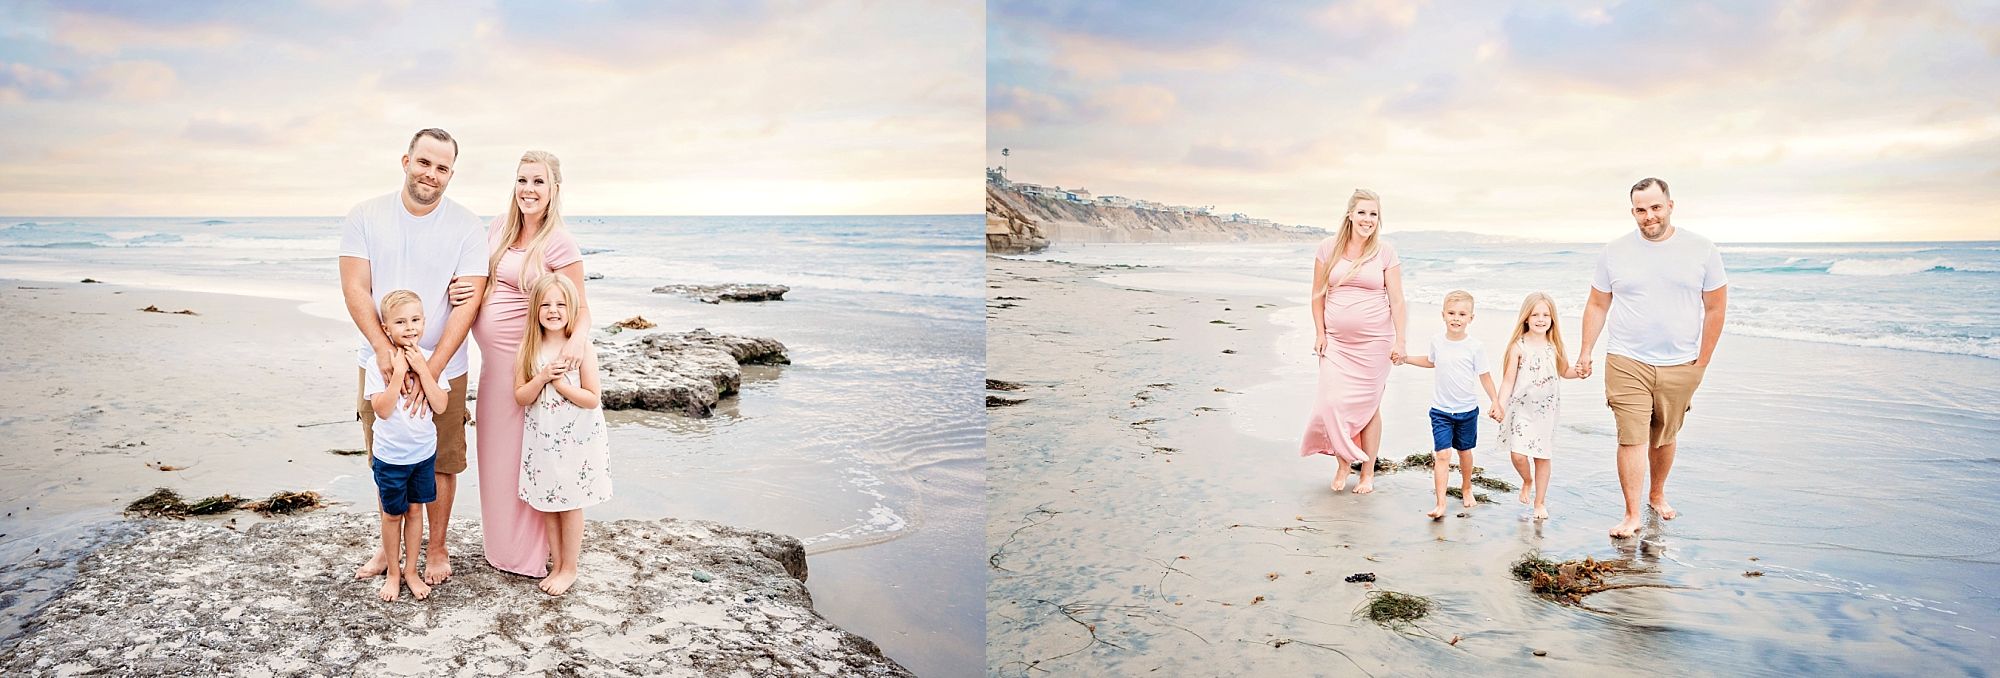 La Jolla maternity session with family at the beach